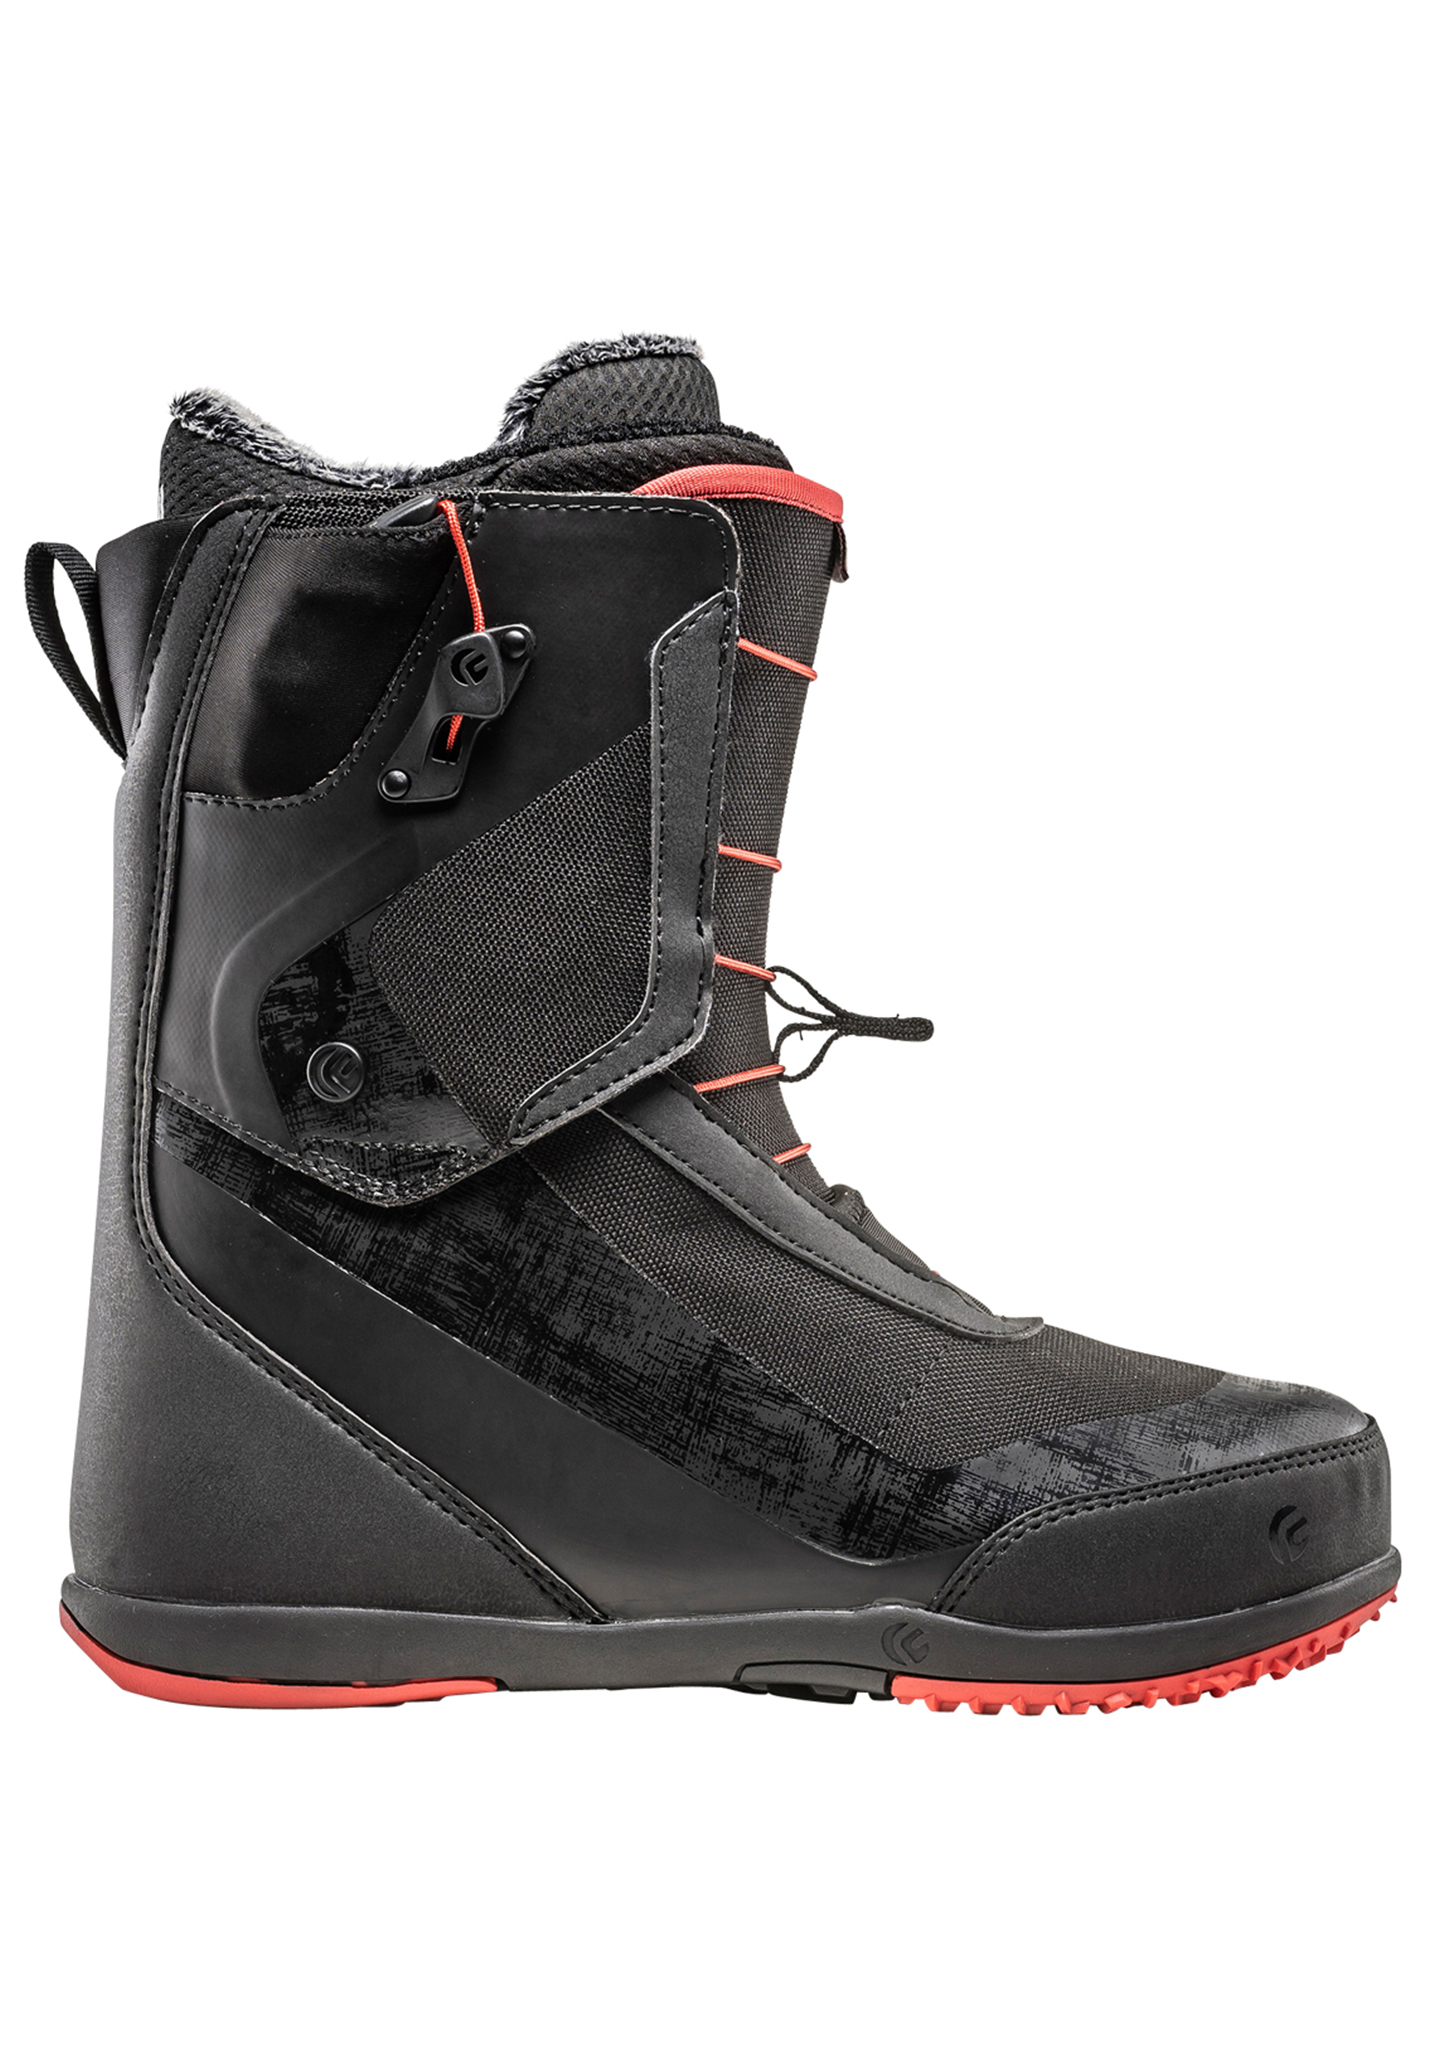 Flux VR-Speed All Mountain Snowboard Boots black-red 43